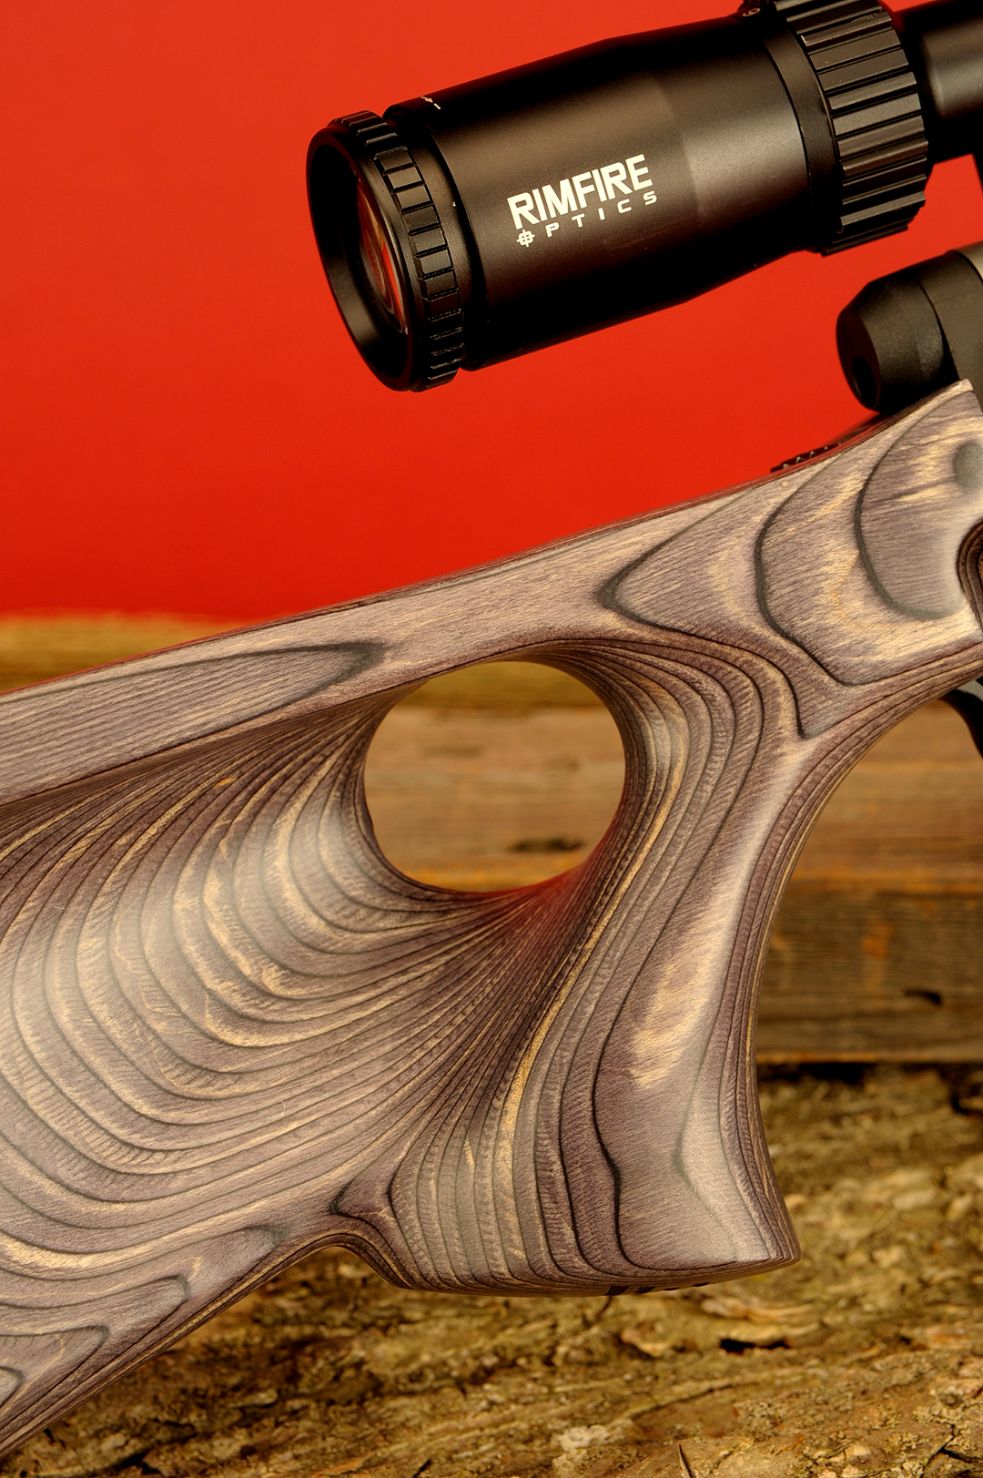 While other types of stocks are available in this series, Trzoniec likes the thumbhole stock the best. The stock is tapered inward towards the thumbhole and the pistol grip is comfortable. The bottom of the pistol grip may be prone to chipping if hunters are not careful, so watch this part of the gun when prone on the ground.